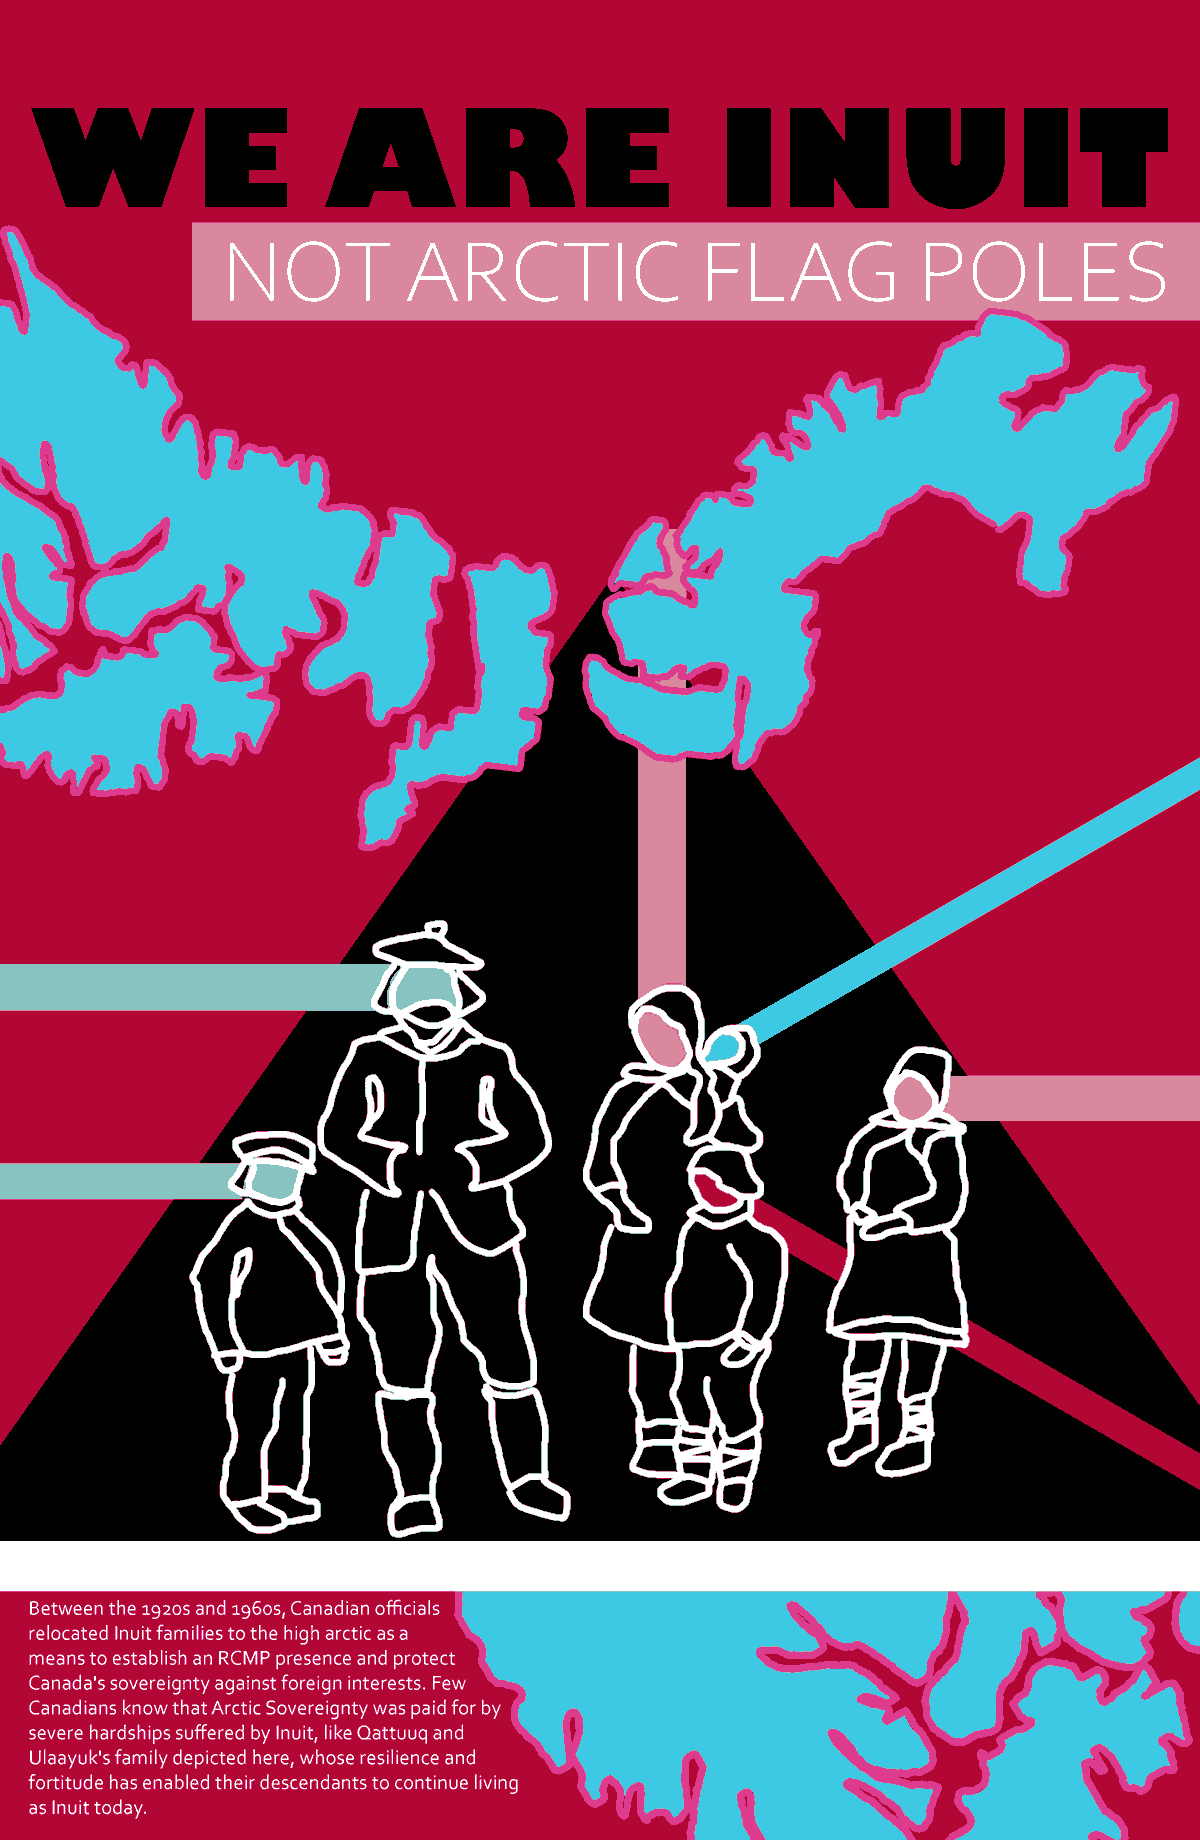 This poster depicts writer Siku Allooloo’s family based on an archival photo taken in 1922. The family is depicted in white lines on a black background with different colours radiating from their heads. The background of the poster is red with the outline of some islands of the high arctic in pink and blue. Along the top it says, “We Are Inuit Not Artic Flag Poles,” and along the bottom it says: “Between the 1920s and 1960s, Canadian officials relocated Inuit families to the high arctic as a means to establish an RCMP presence and protect Canada’s sovereignty against foreign interests. Few Canadians know that Arctic Sovereignty was paid for by severe hardships suffered by Inuit, like Qattuuq and Ulaayuk’s family depicted here, whose resilience and fortitude has enabled their descendants to continue living as Inuit today.”